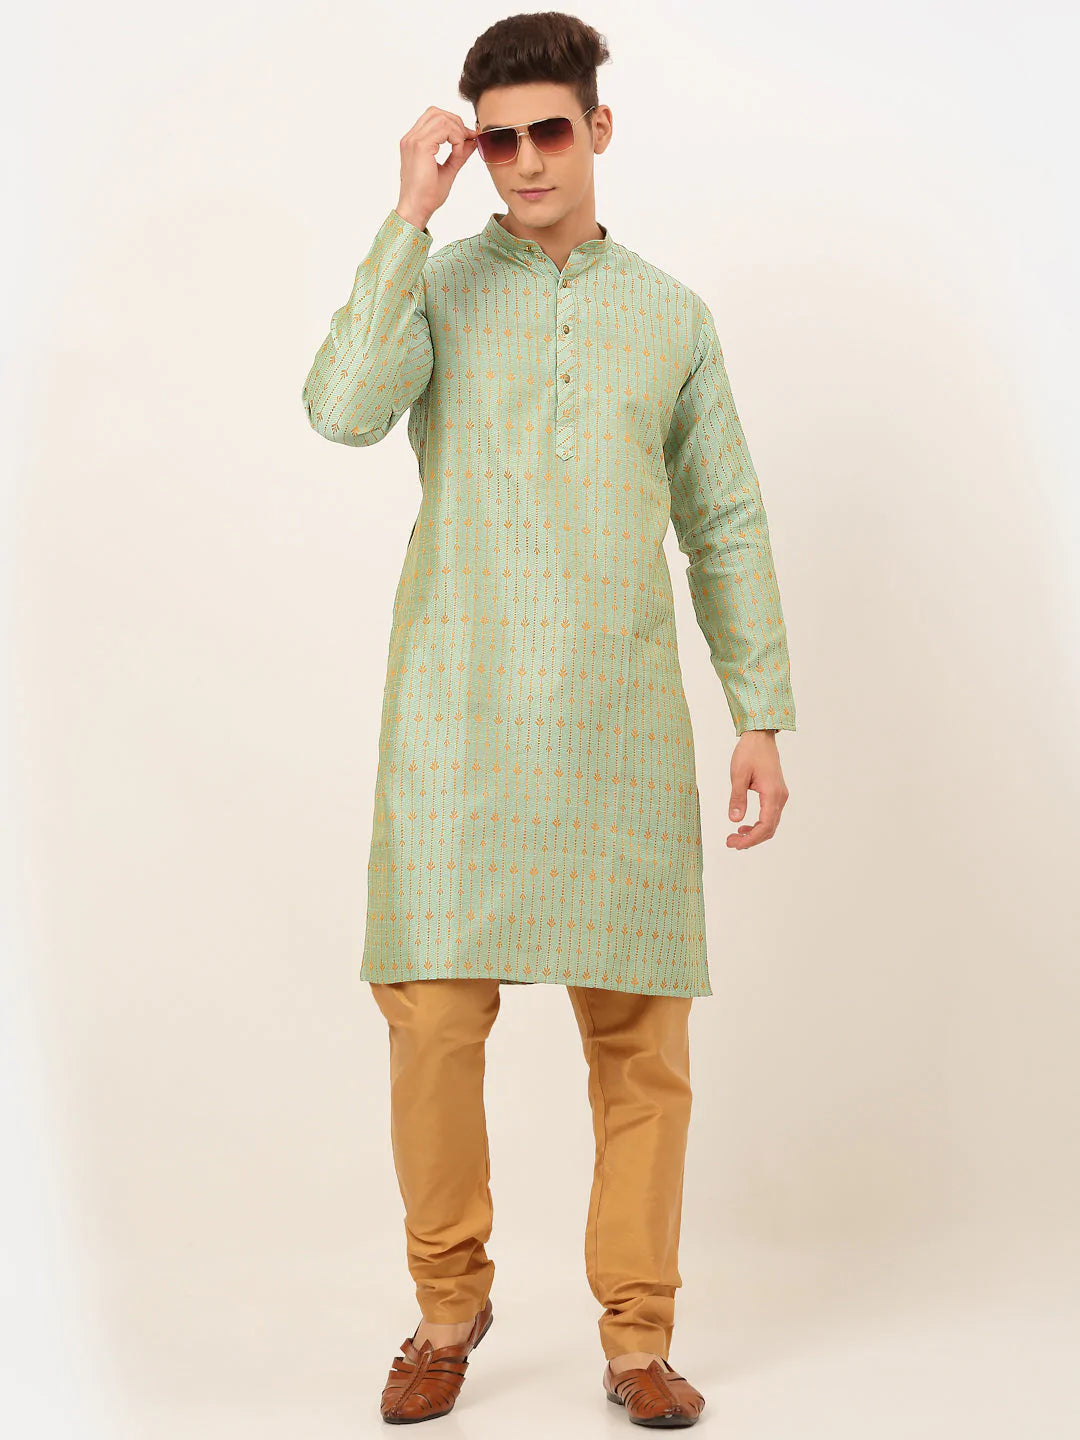 Jompers Men's Lime Green Embroidered Kurta Only ( KO 676 Lime )